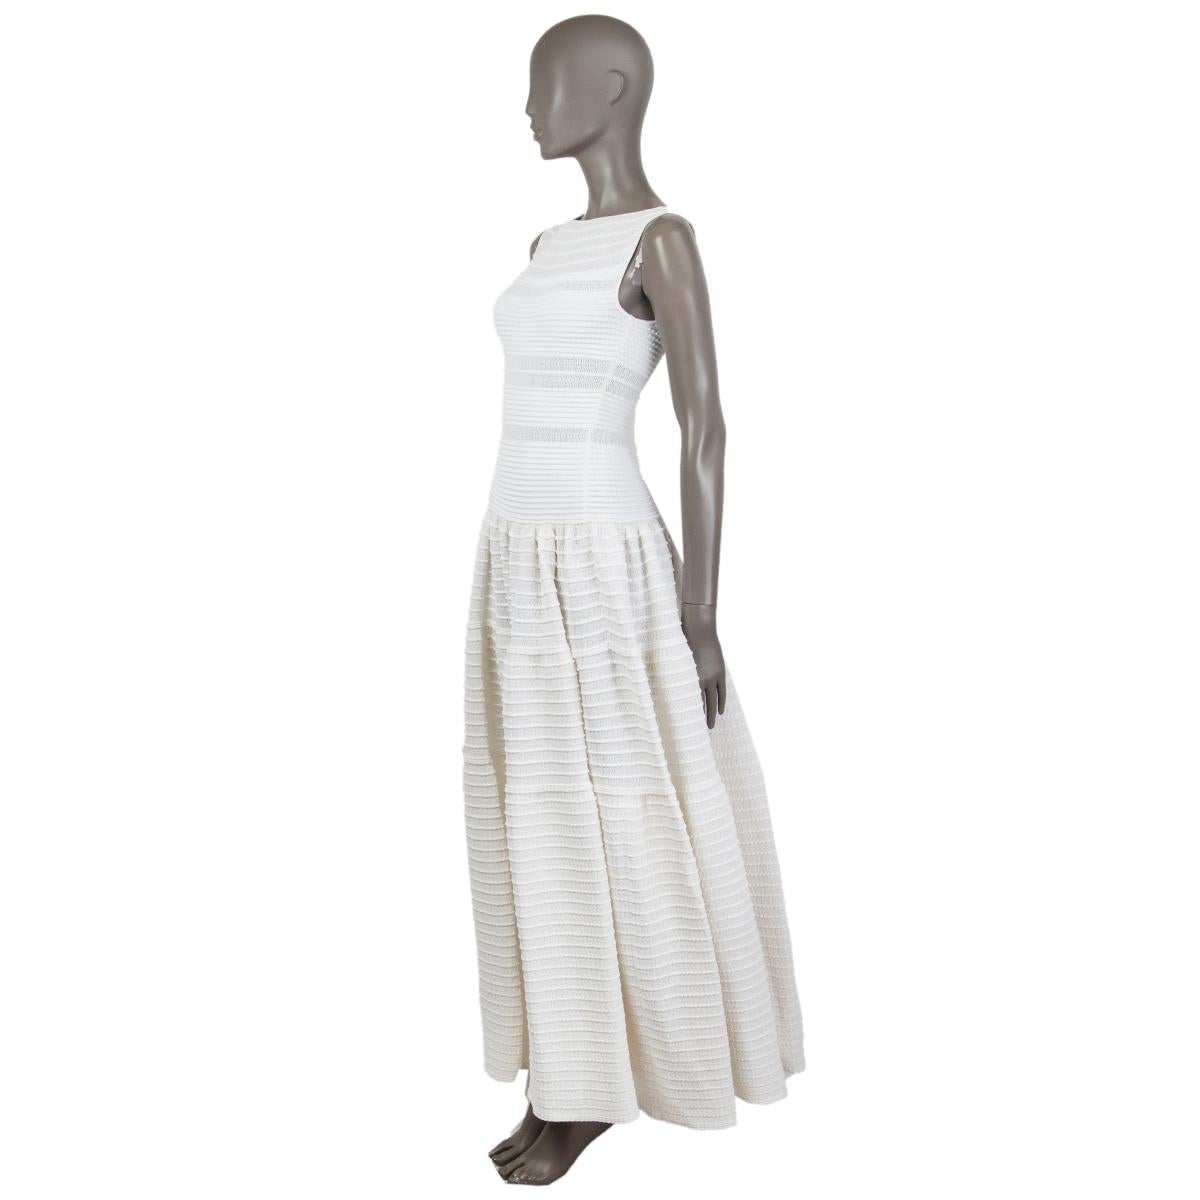 Alaïa sleeveless fit-to-flare knit dress in white and off-white cotton (40%), viscose (35%), nylon (15%) and polyester (10%) with a round neck. Closes on the side with a concealed zipper. Unlined and partially sheer. Fabric has come slightly undone